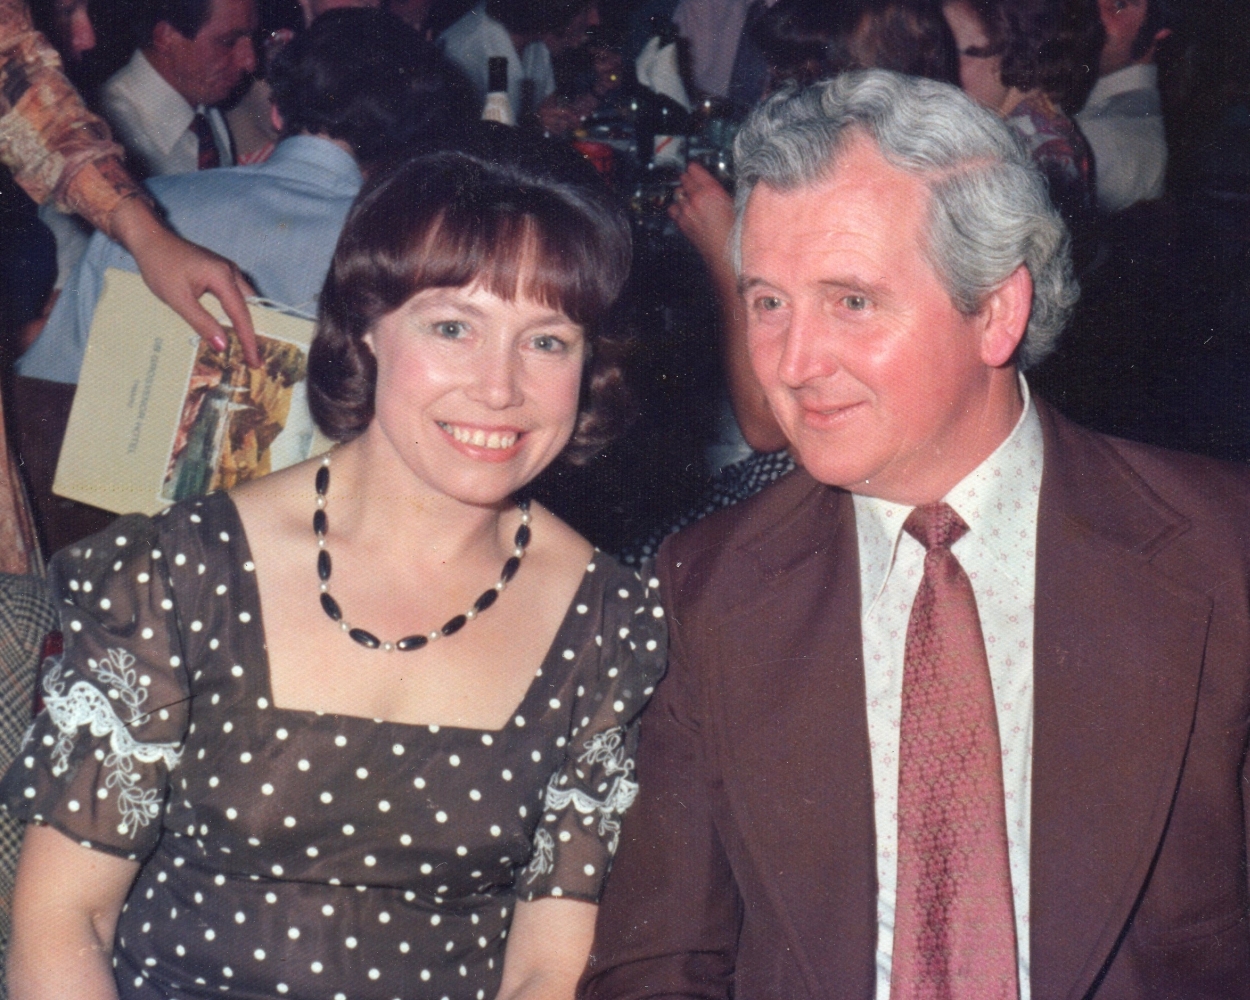 Henia and George 
at a social function. Henia's dress is brown-dotted, square-necked and has intricate lace detail on the short sleeves